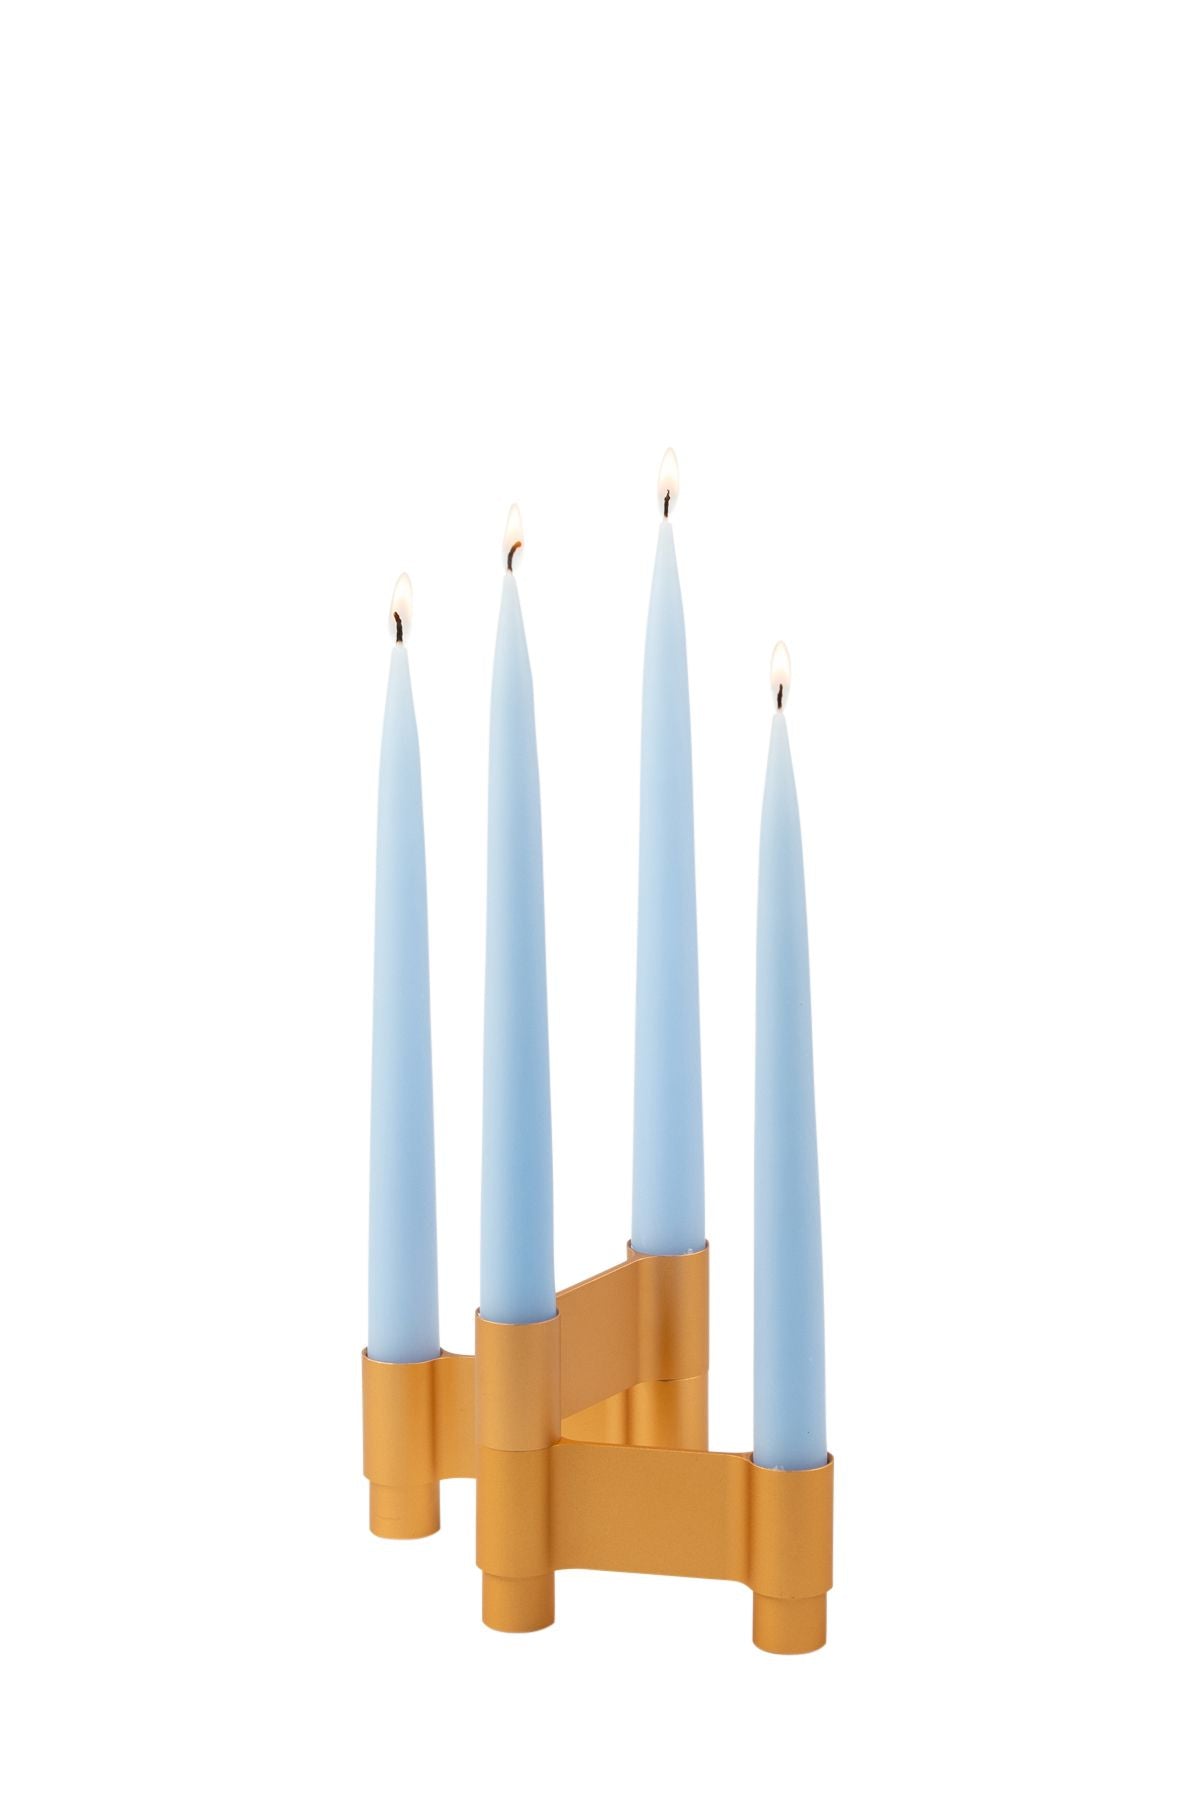 Studio over Link Candle Holder, Golden Anodized